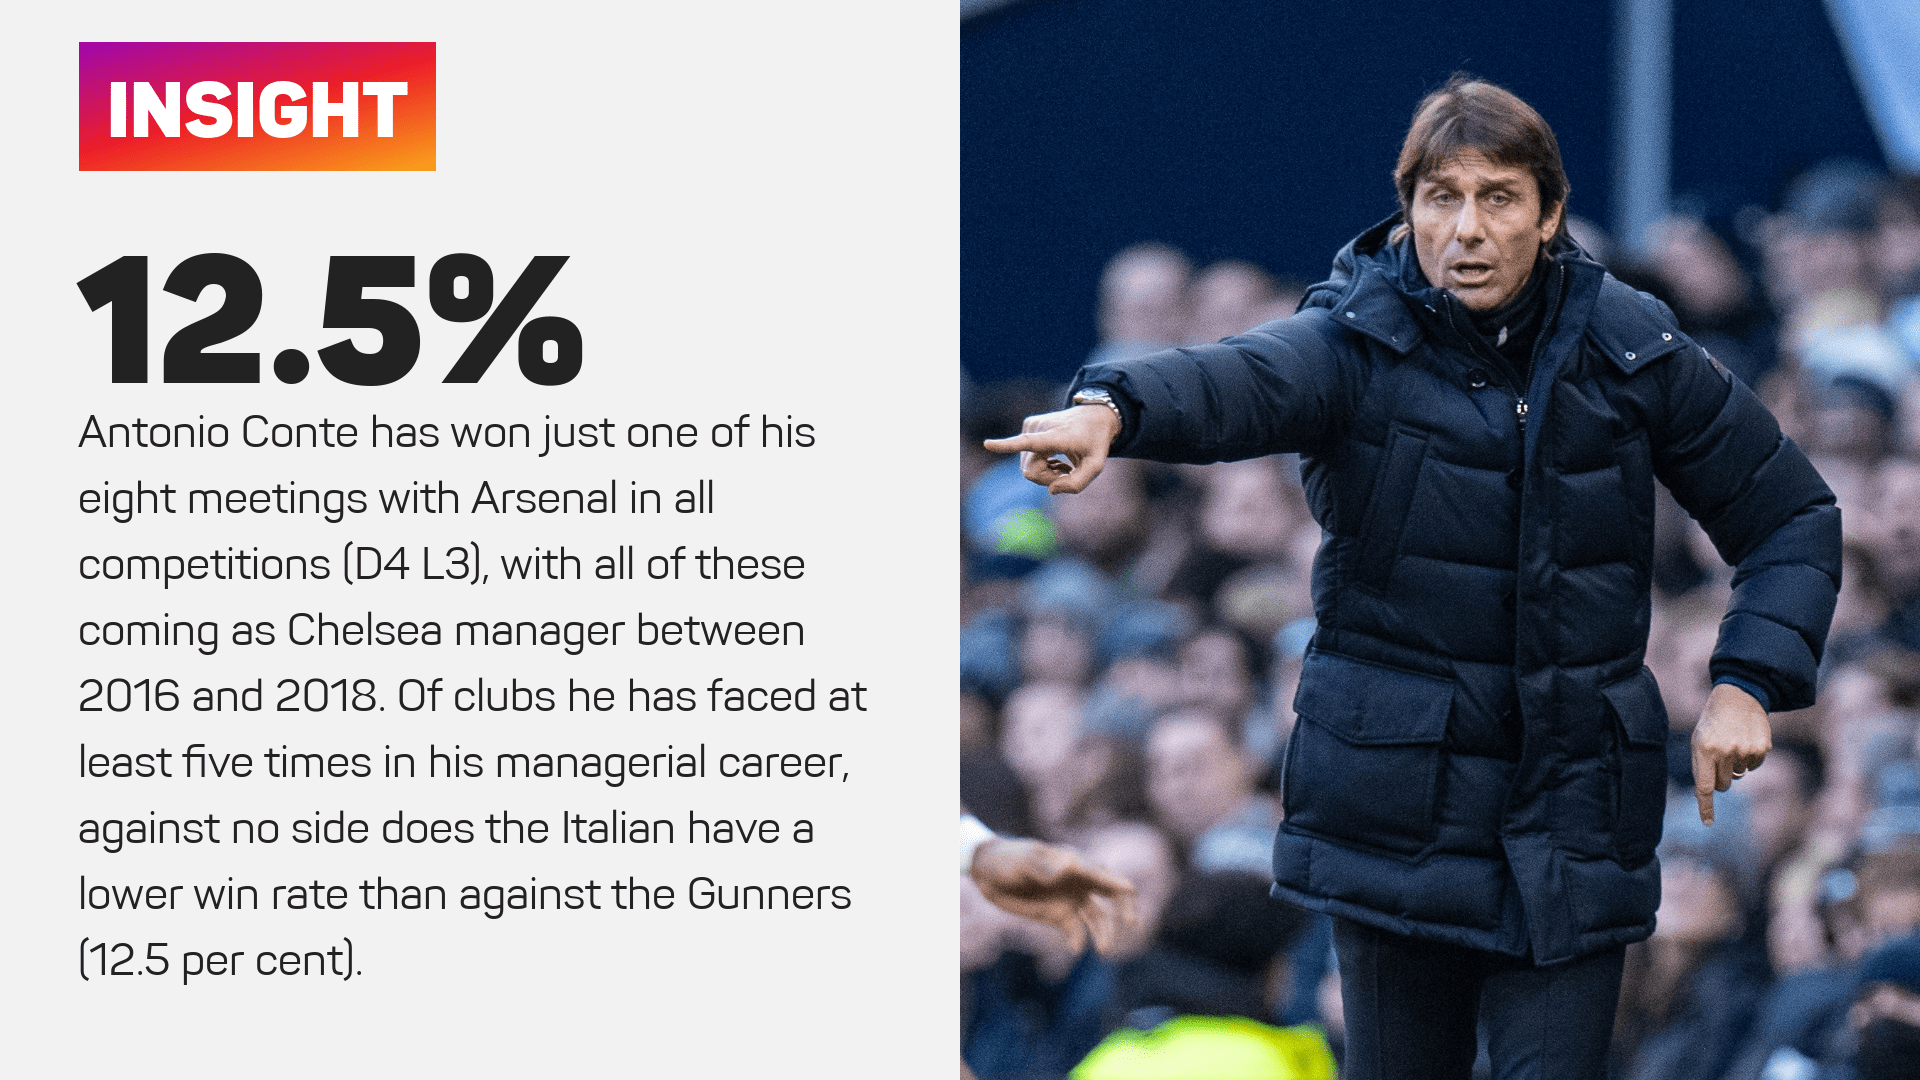 Antonio Conte does not have a great record against Arsenal